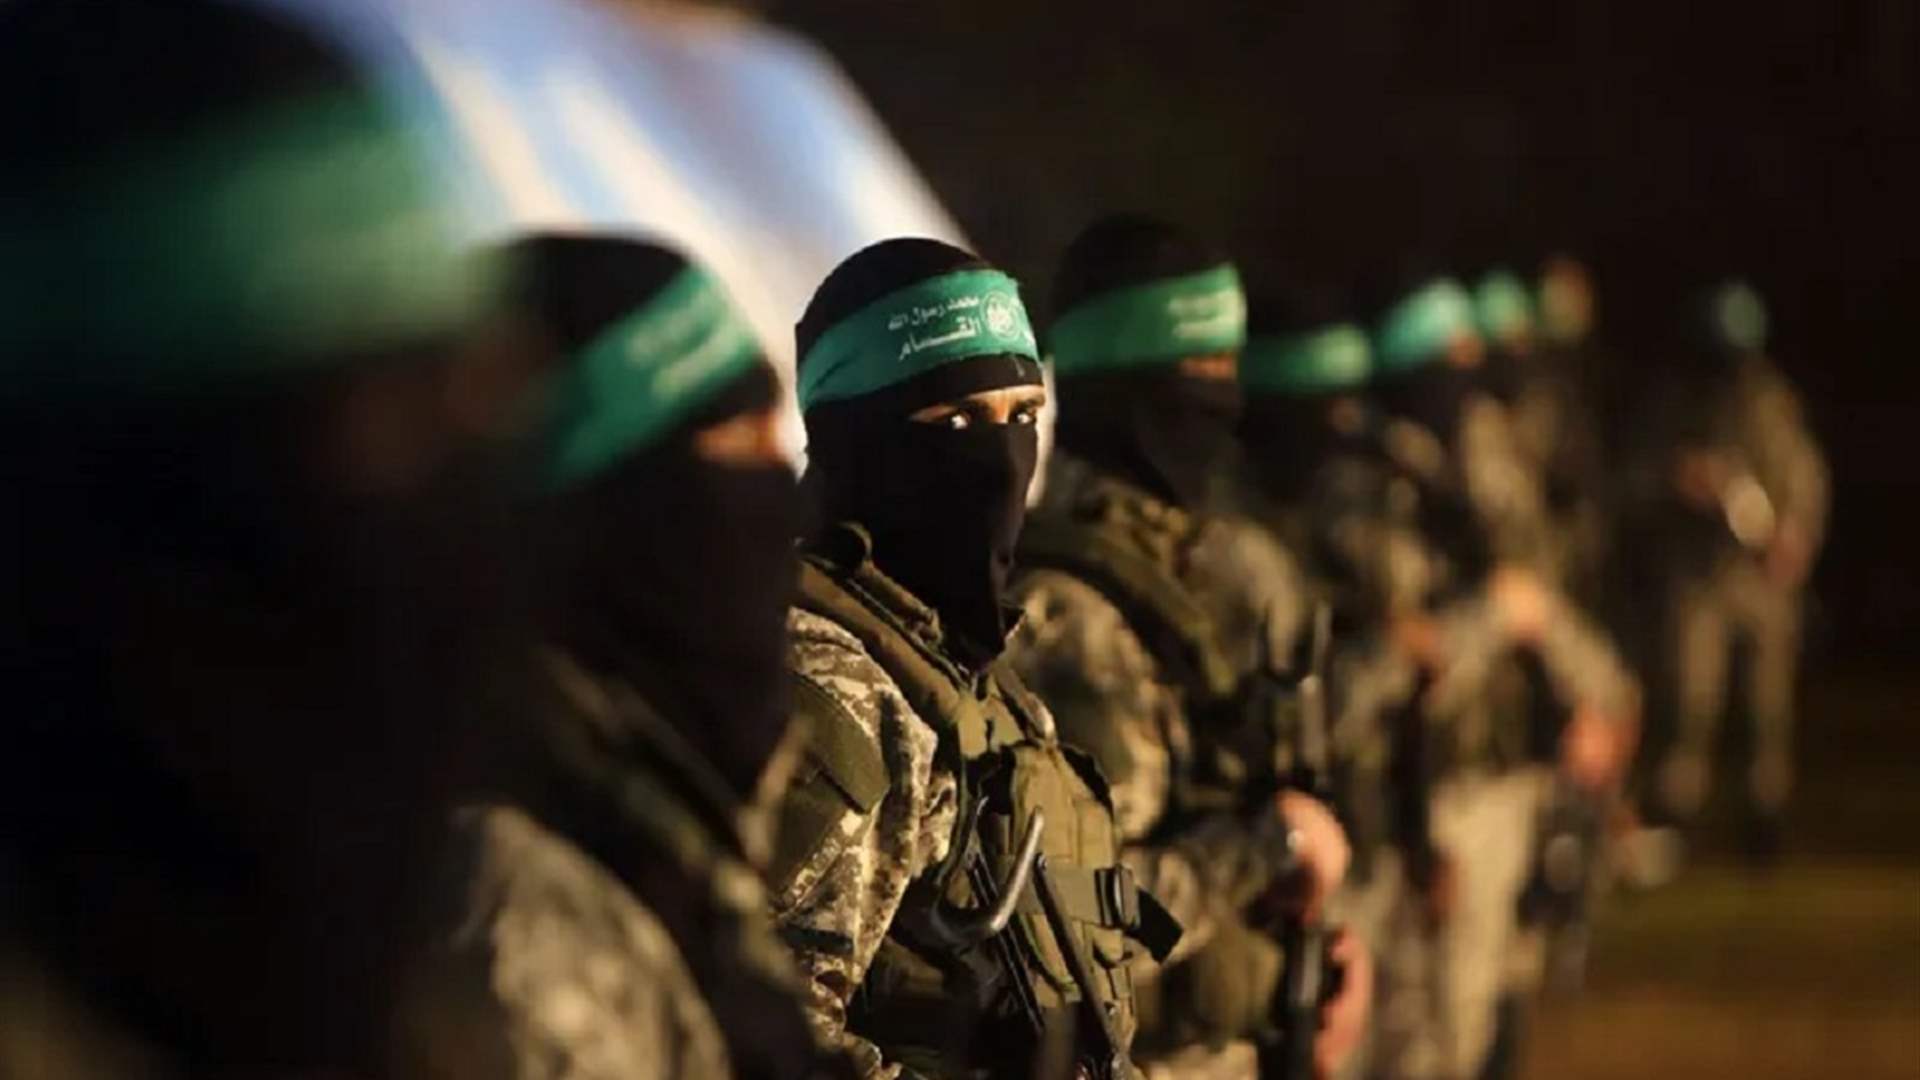 Hamas and Hezbollah: Strategic Coordination in the Face of Conflict